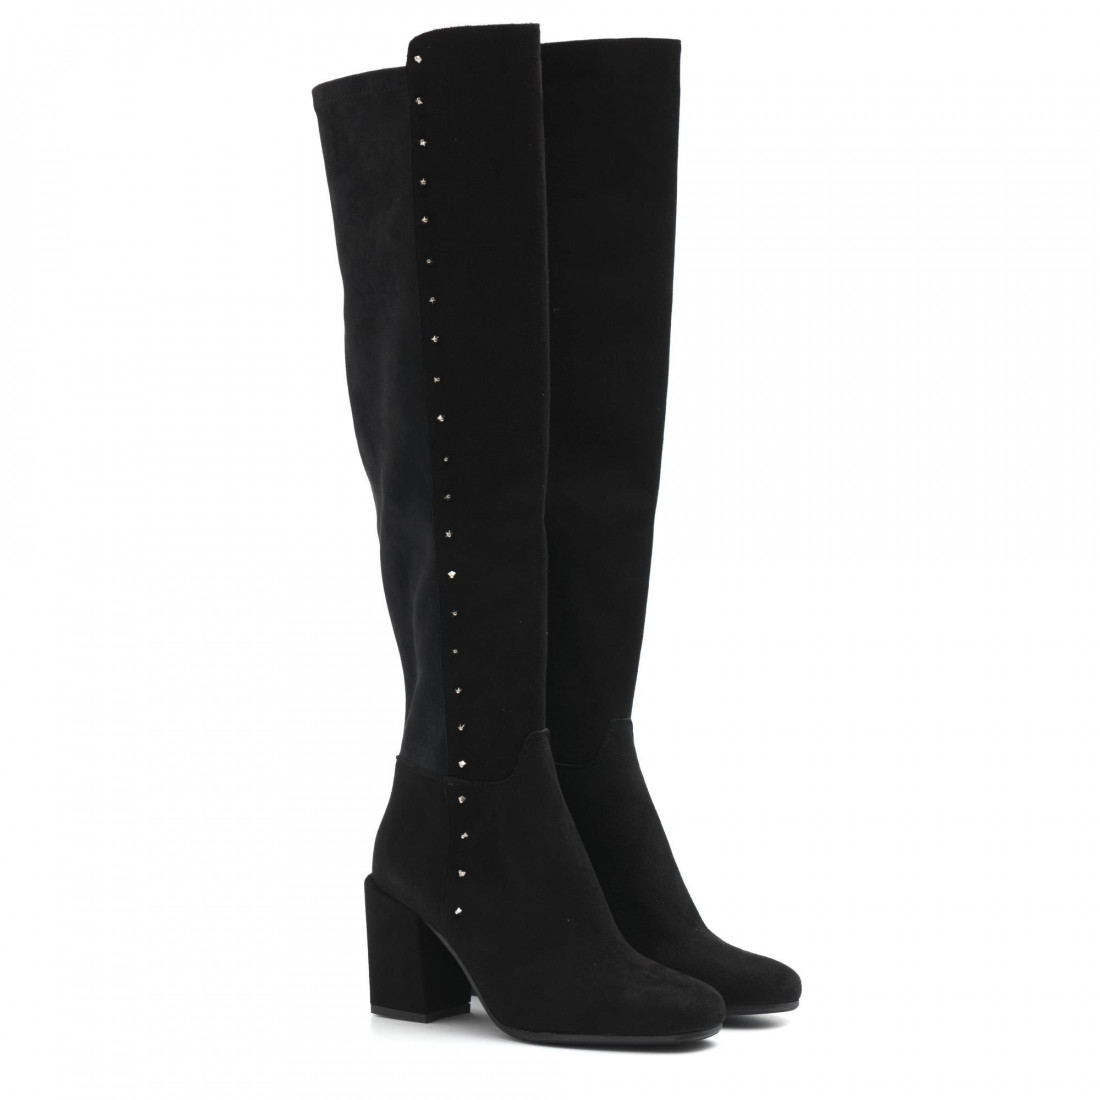 Black stratch studded suede boots with high heel